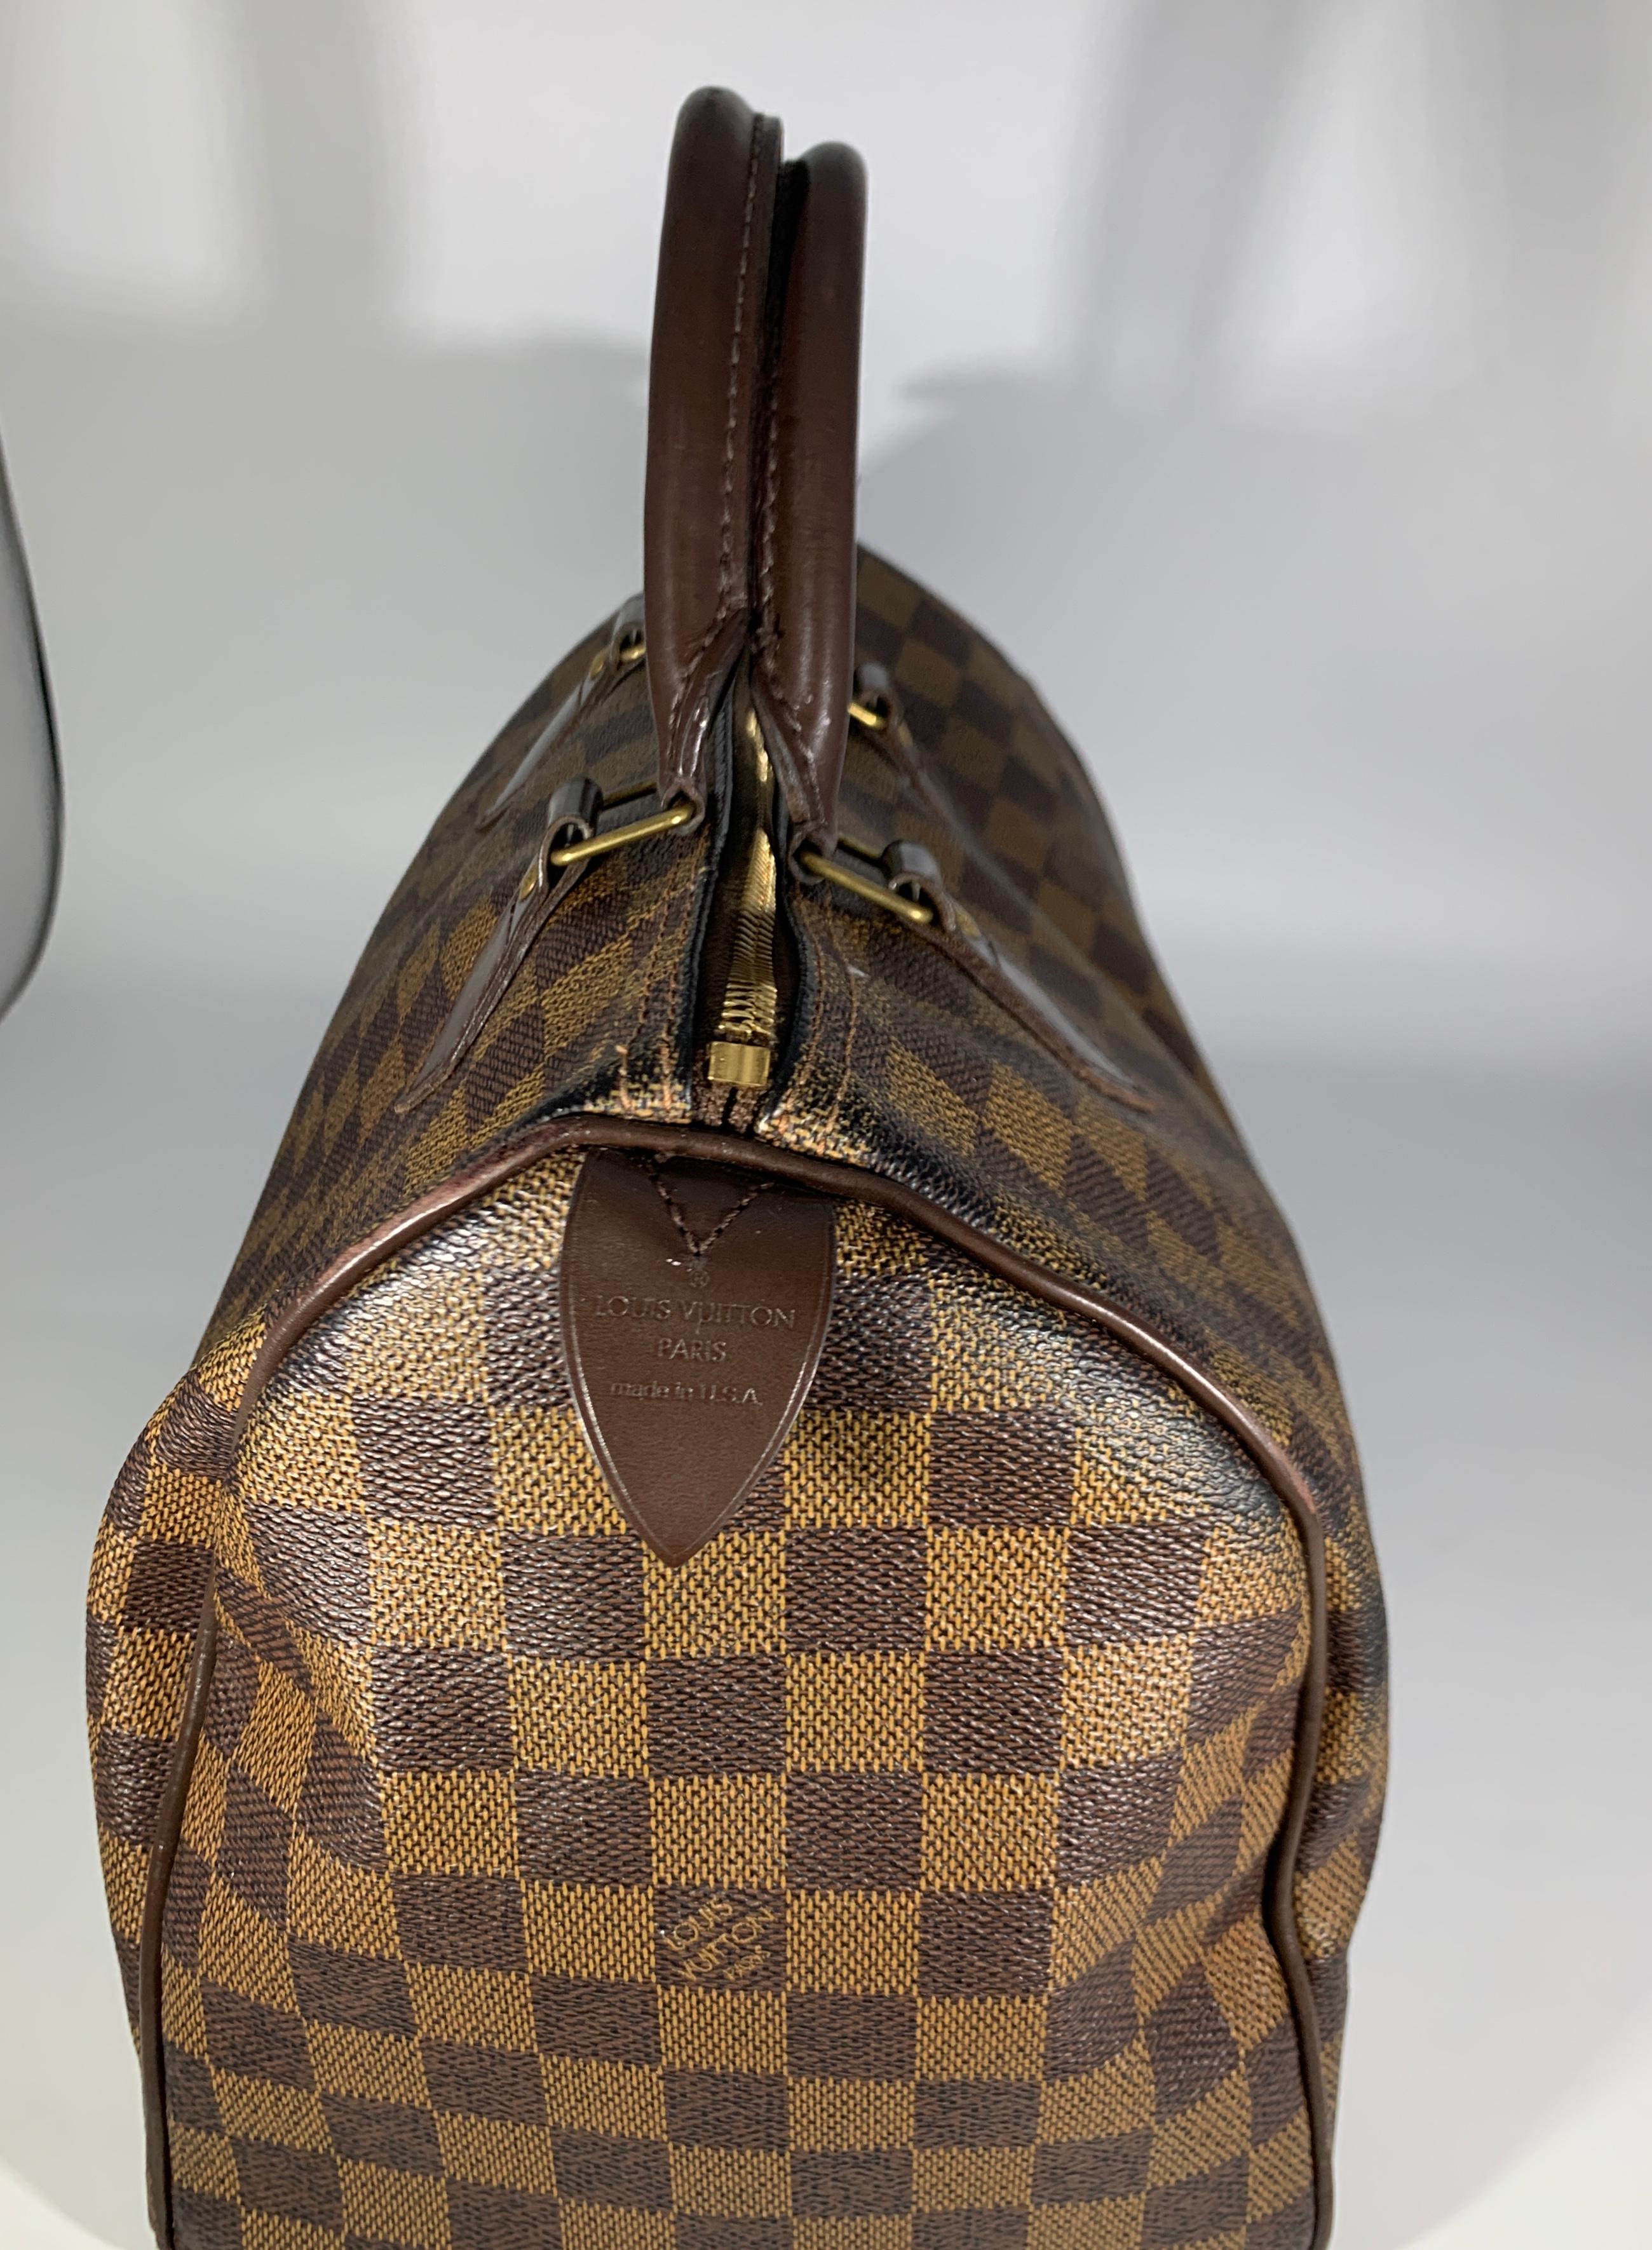 This is an authentic LOUIS VUITTON Damier Ebene Speedy 30 . This stylish doctor style tote is crafted in Louis Vuitton Damier checkered coated canvas in brown. It features brown leather rolled top handles detailed with polished brass hardware. The